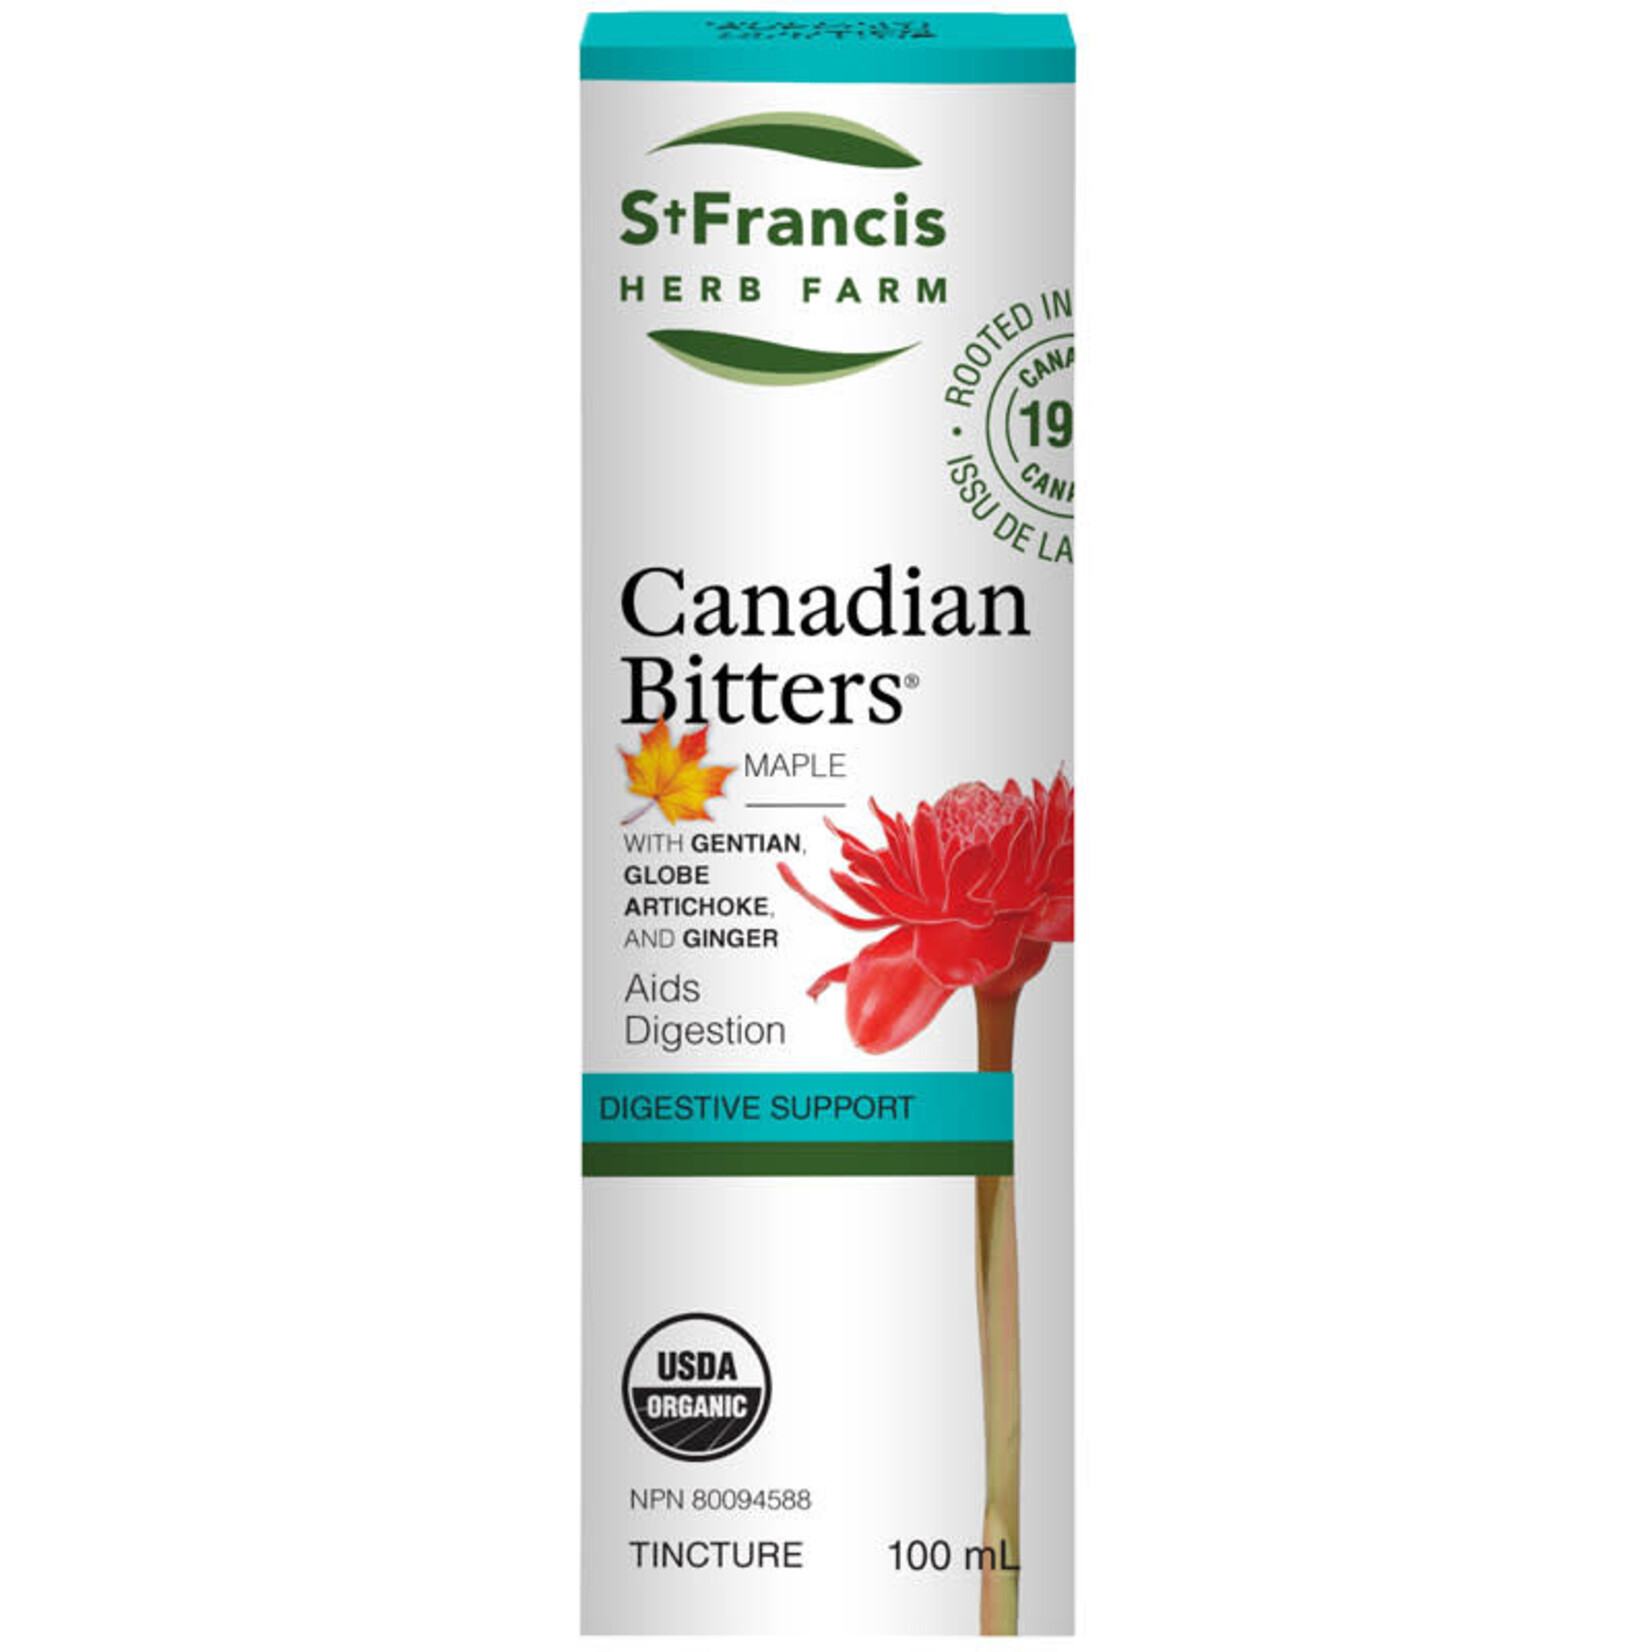 ST FRANCIS ST FRANCIS CANADIAN BITTERS MAPLE 50ML